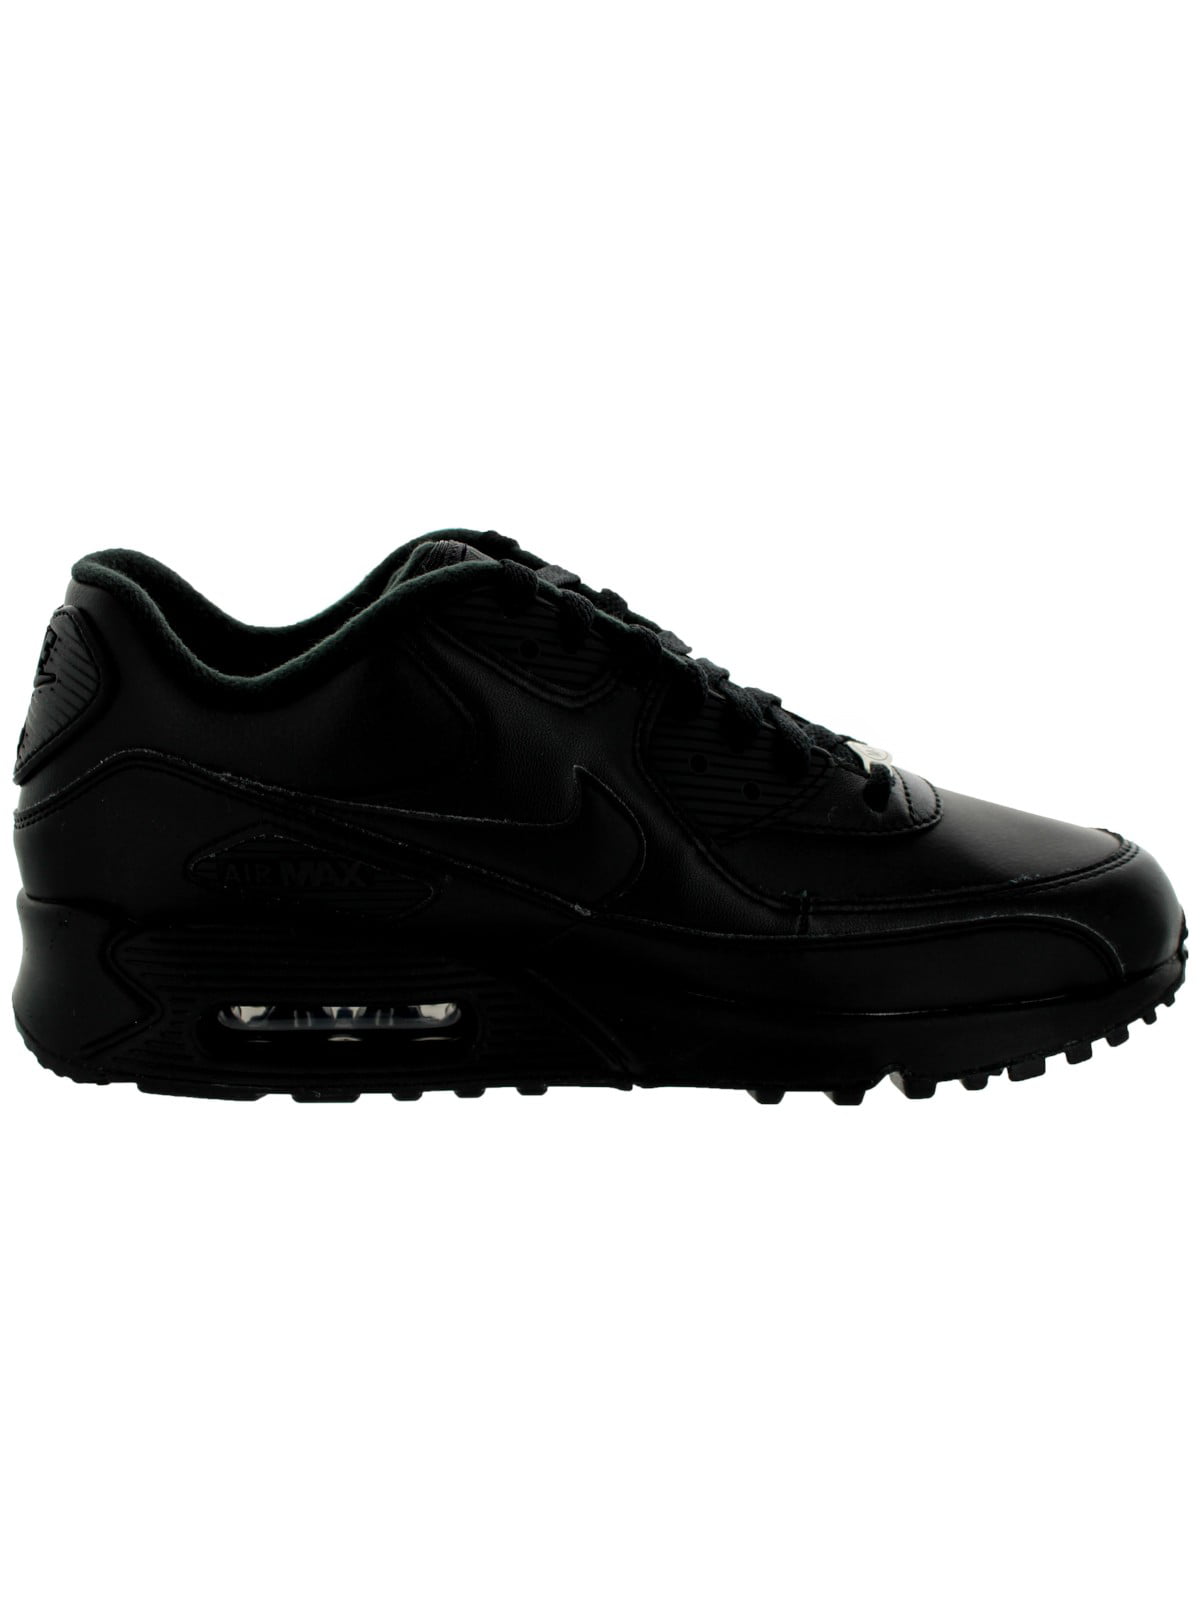 nike men's air max 90 leather running shoe